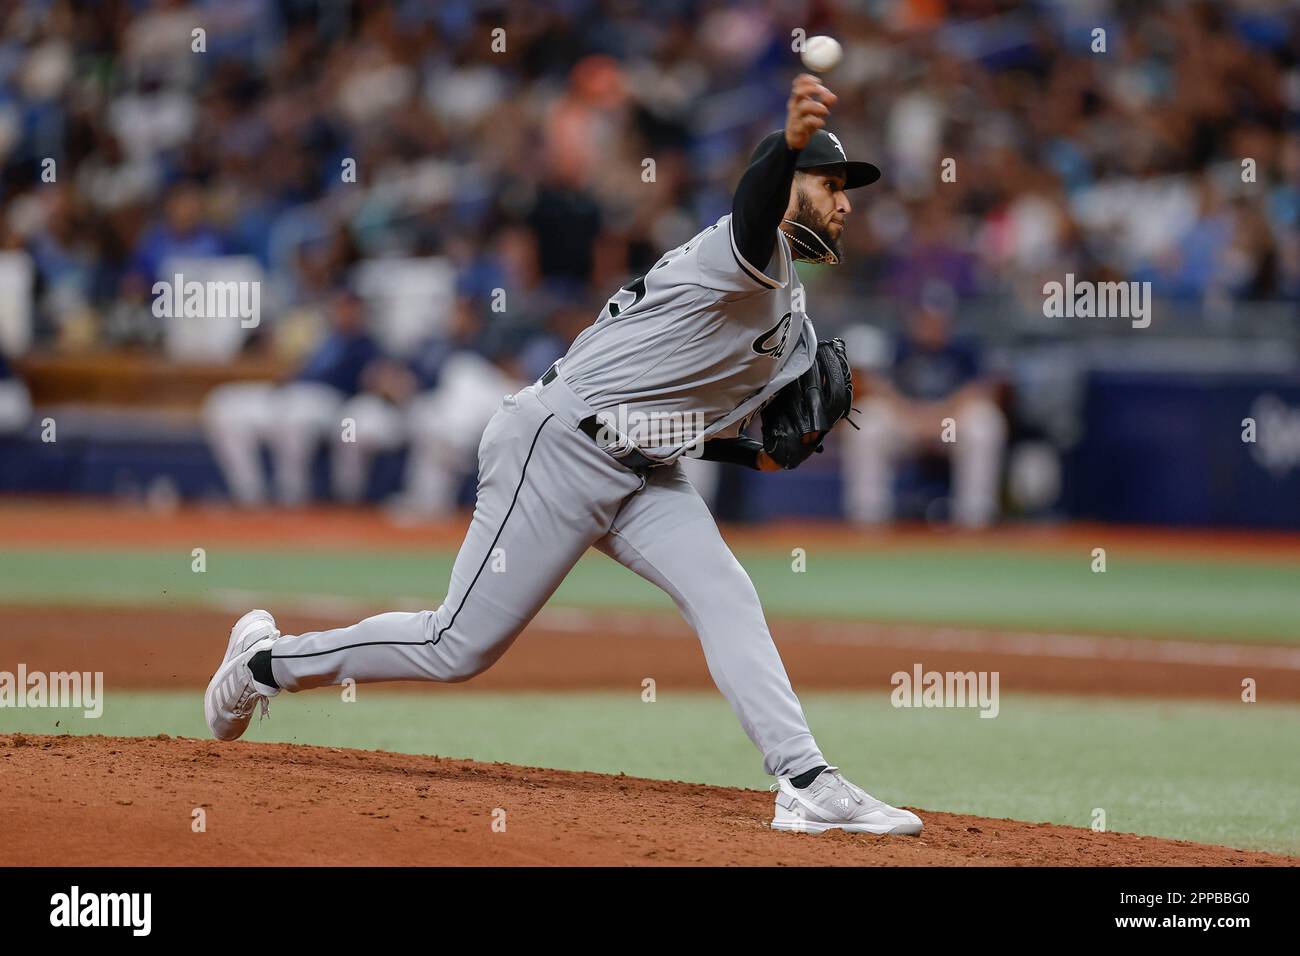 St. Petersburg, FL USA; Chicago White Sox relief pitcher Keynan Middleton (99) delivers a pitch during an MLB game against the Tampa Bay Rays on Satur Stock Photo